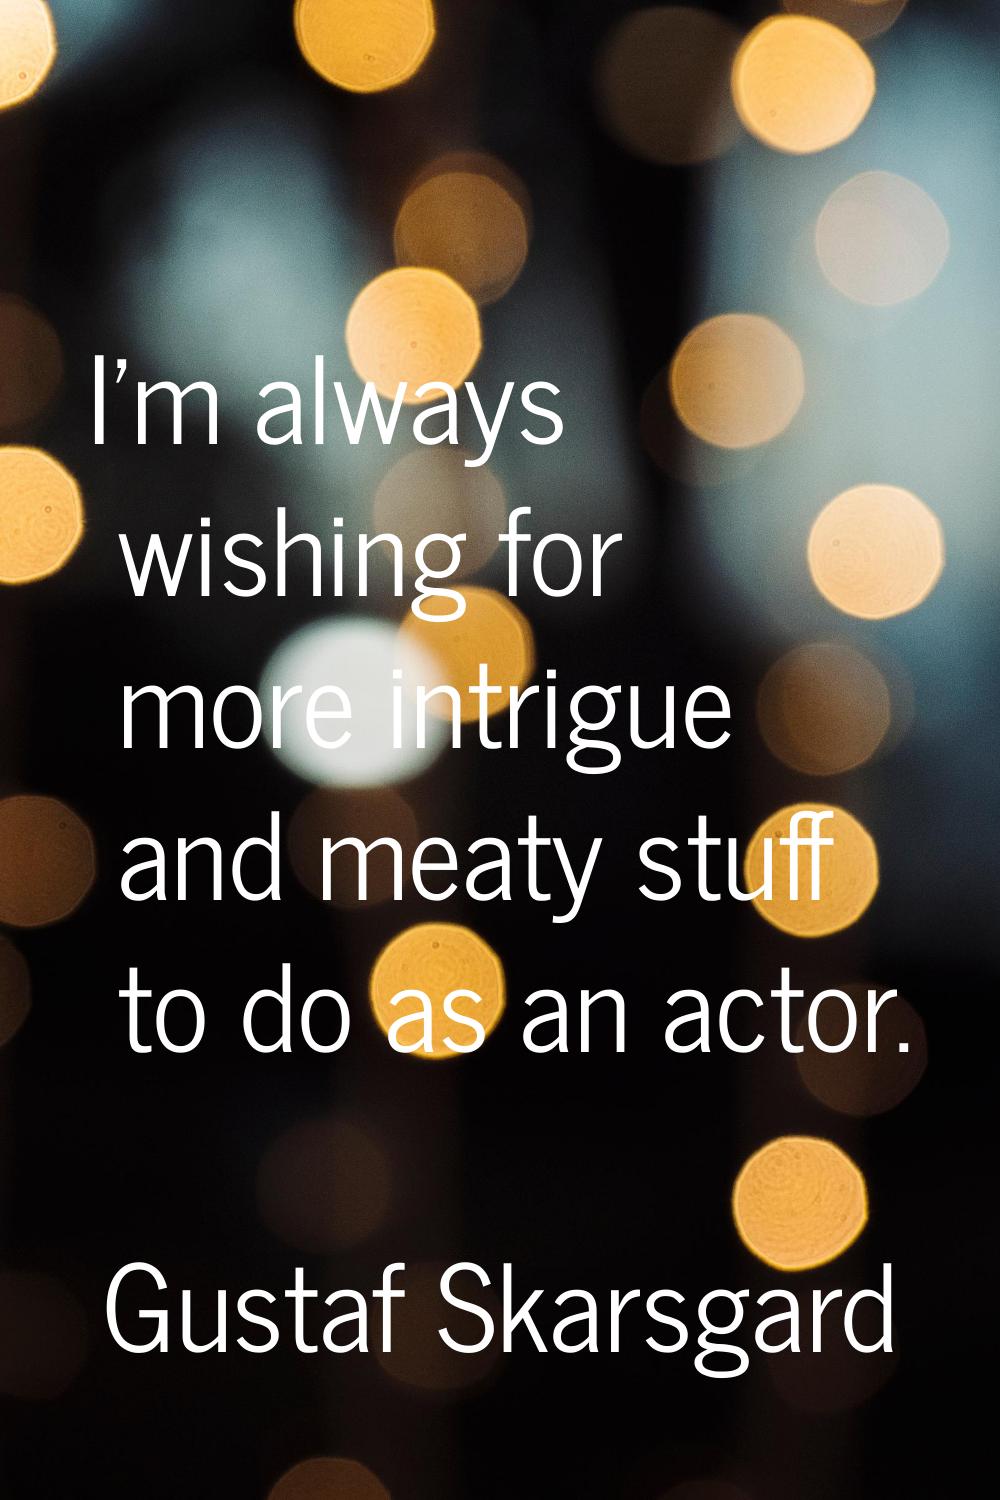 I'm always wishing for more intrigue and meaty stuff to do as an actor.